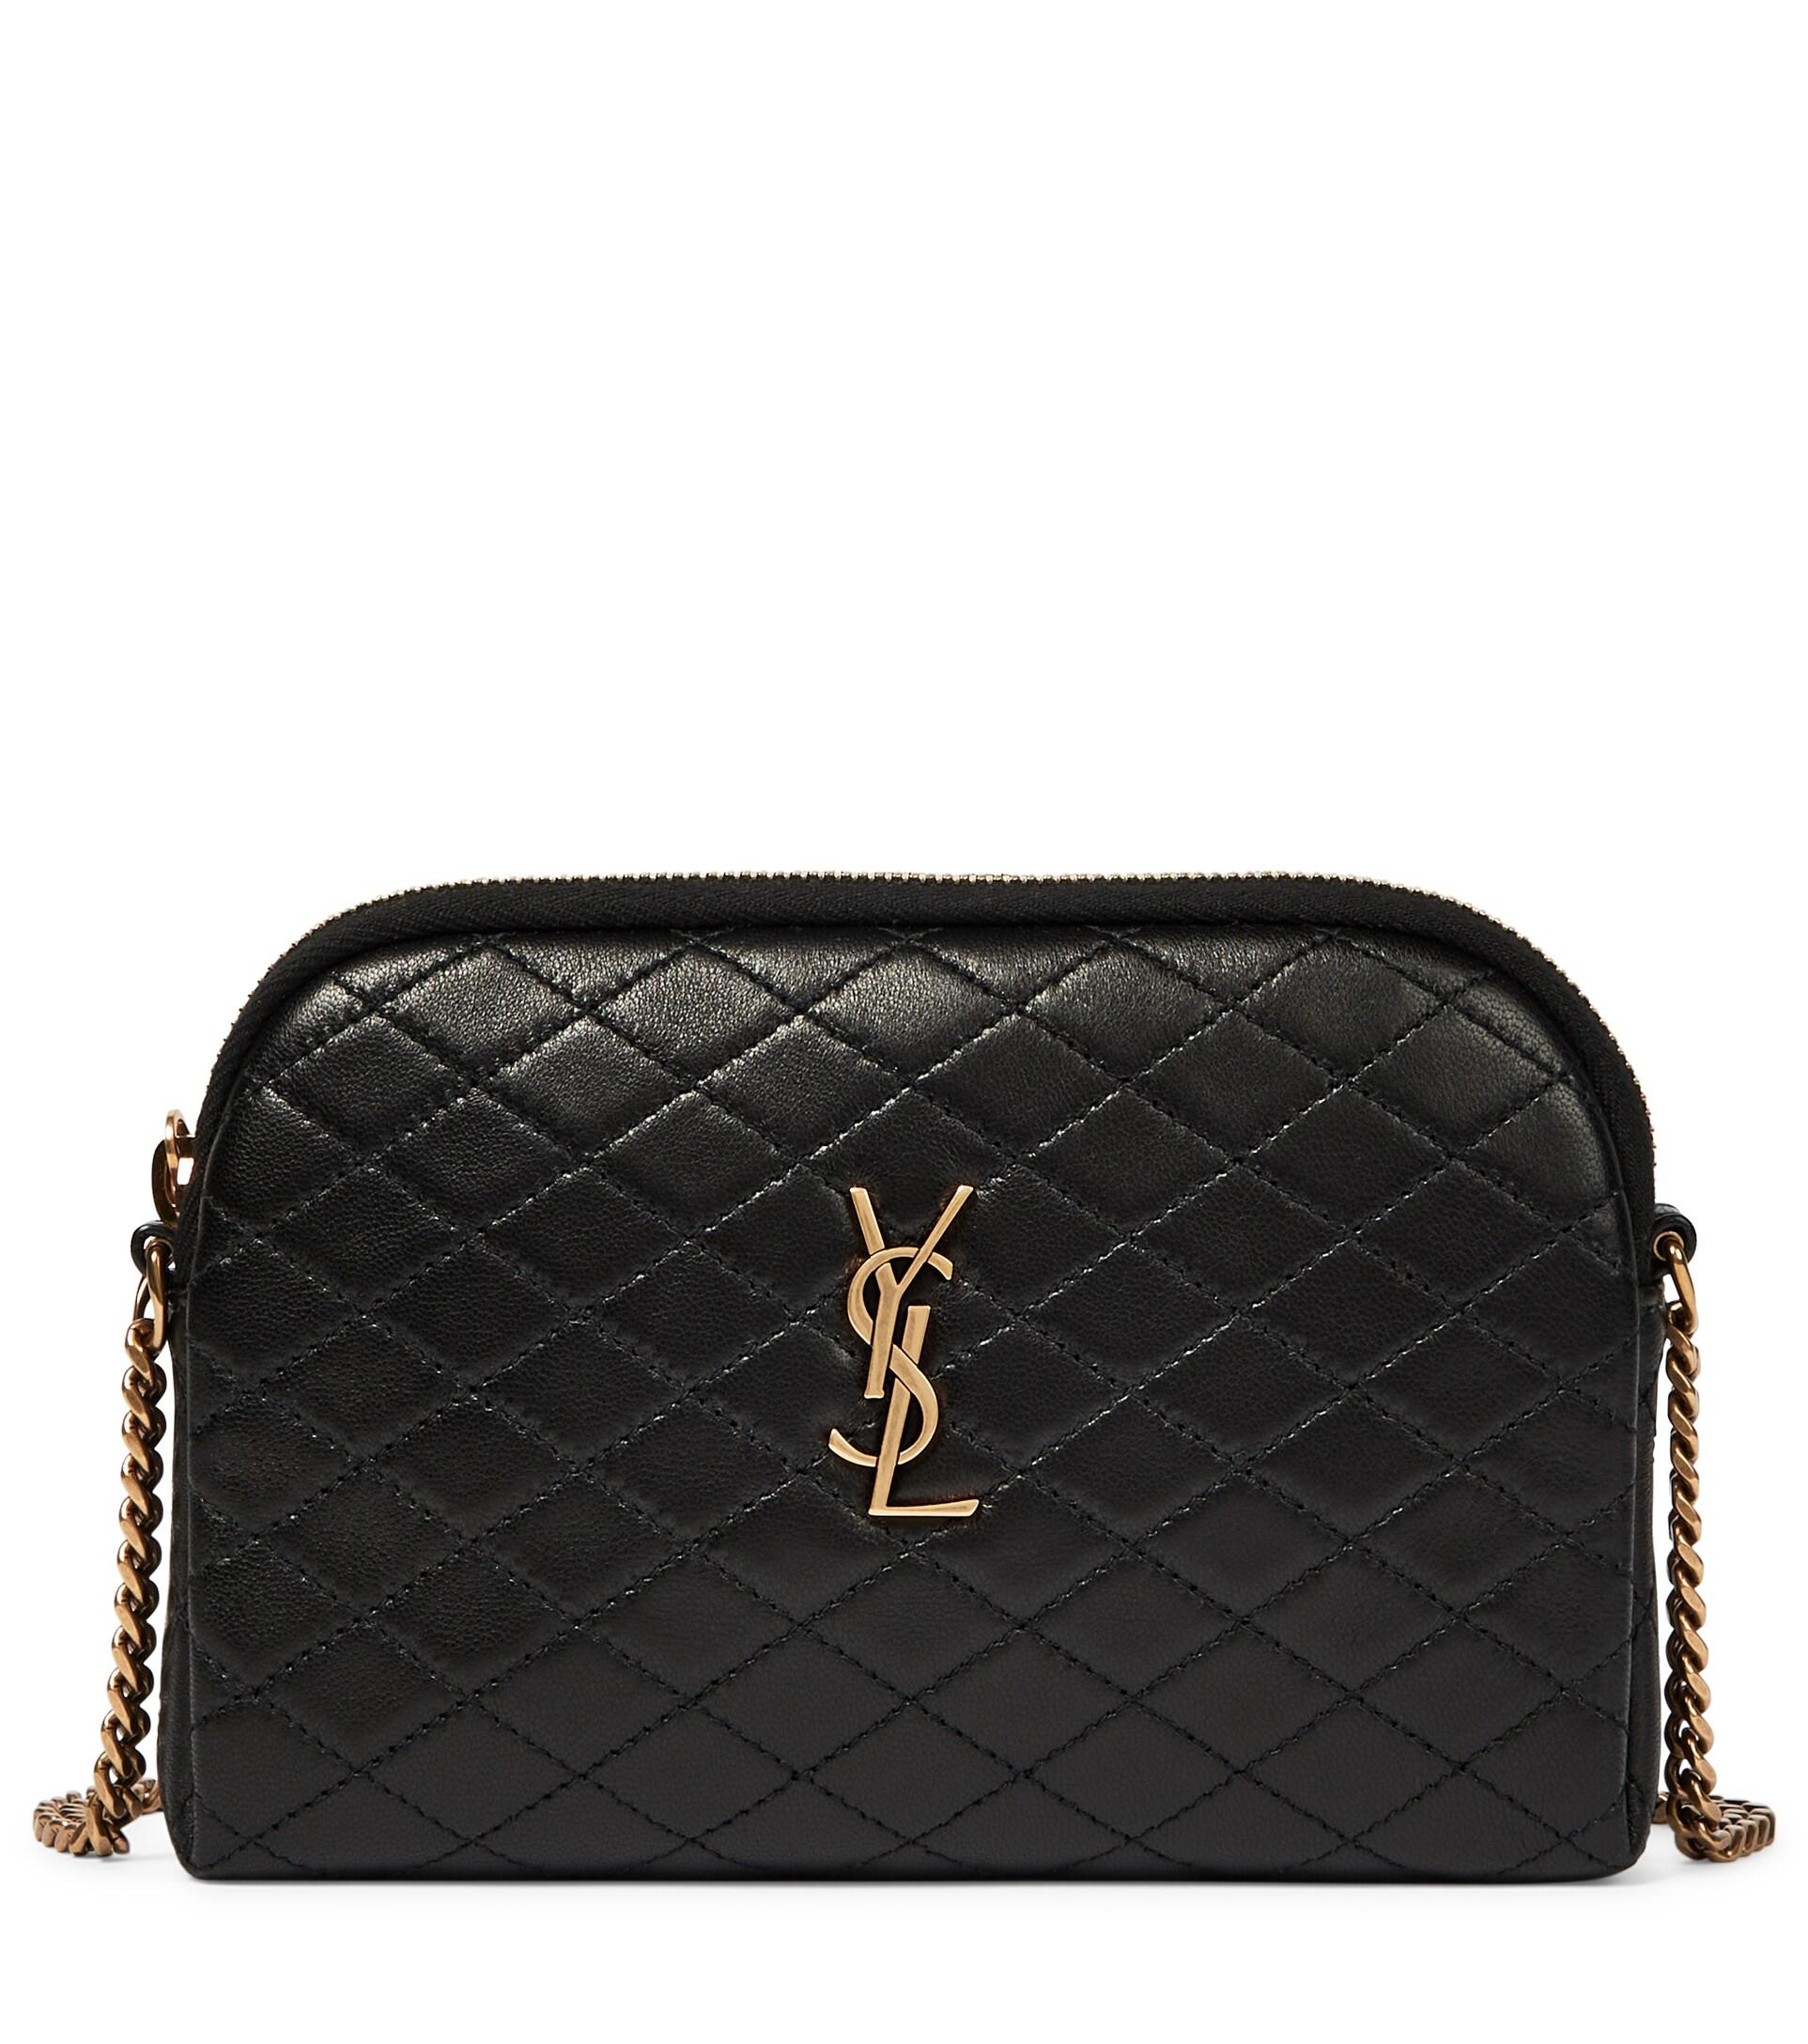 Saint Laurent Gaby Small Leather Clutch in Black | Lyst